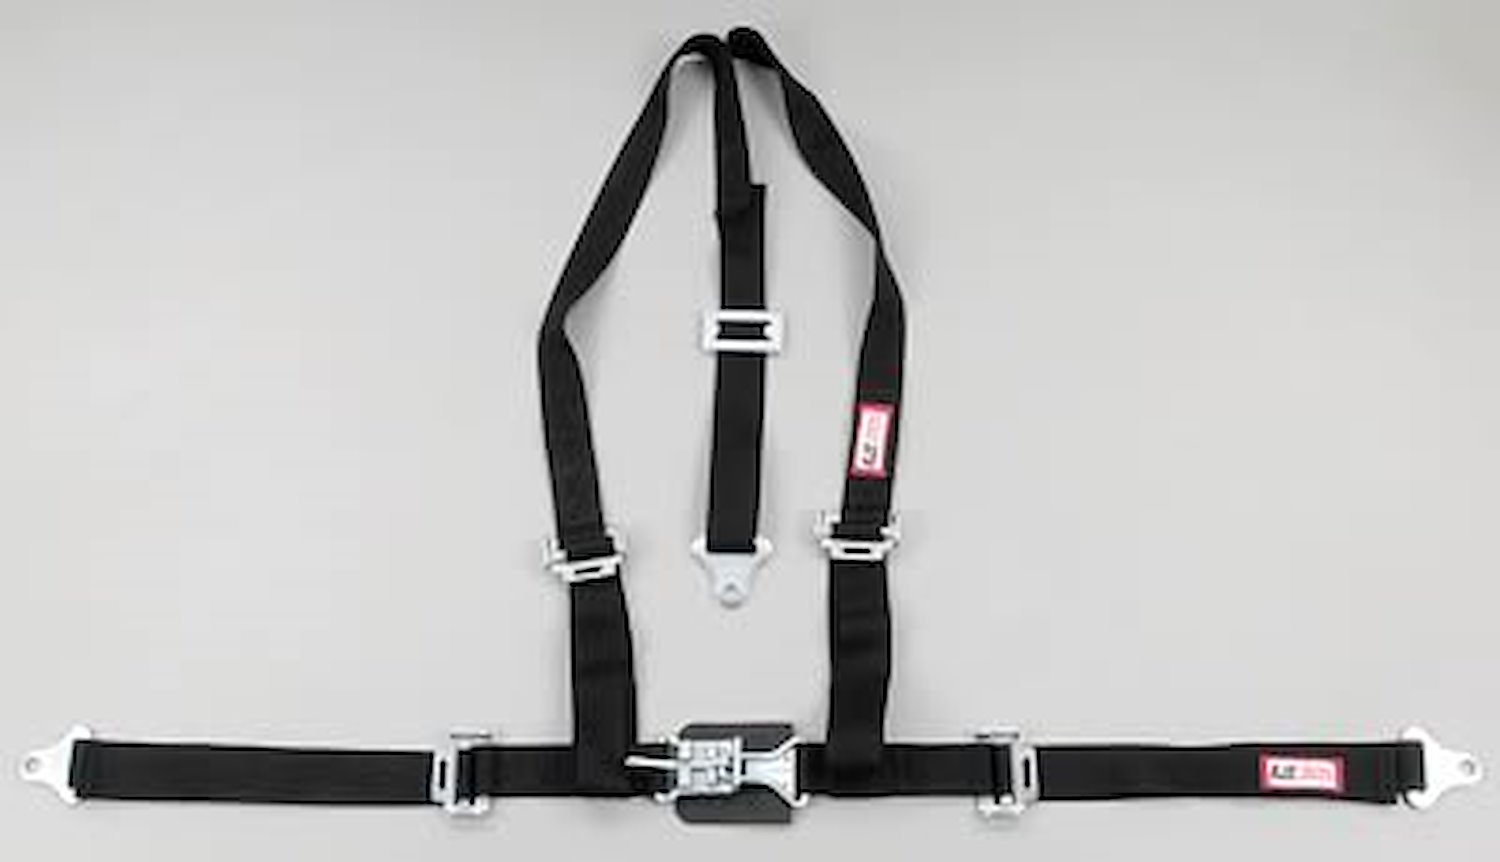 NON-SFI L&L HARNESS 3 PULL DOWN Lap Belt SNAP SEWN IN 2 S.H. Individual FLOOR Mount WRAP/BOLT RED